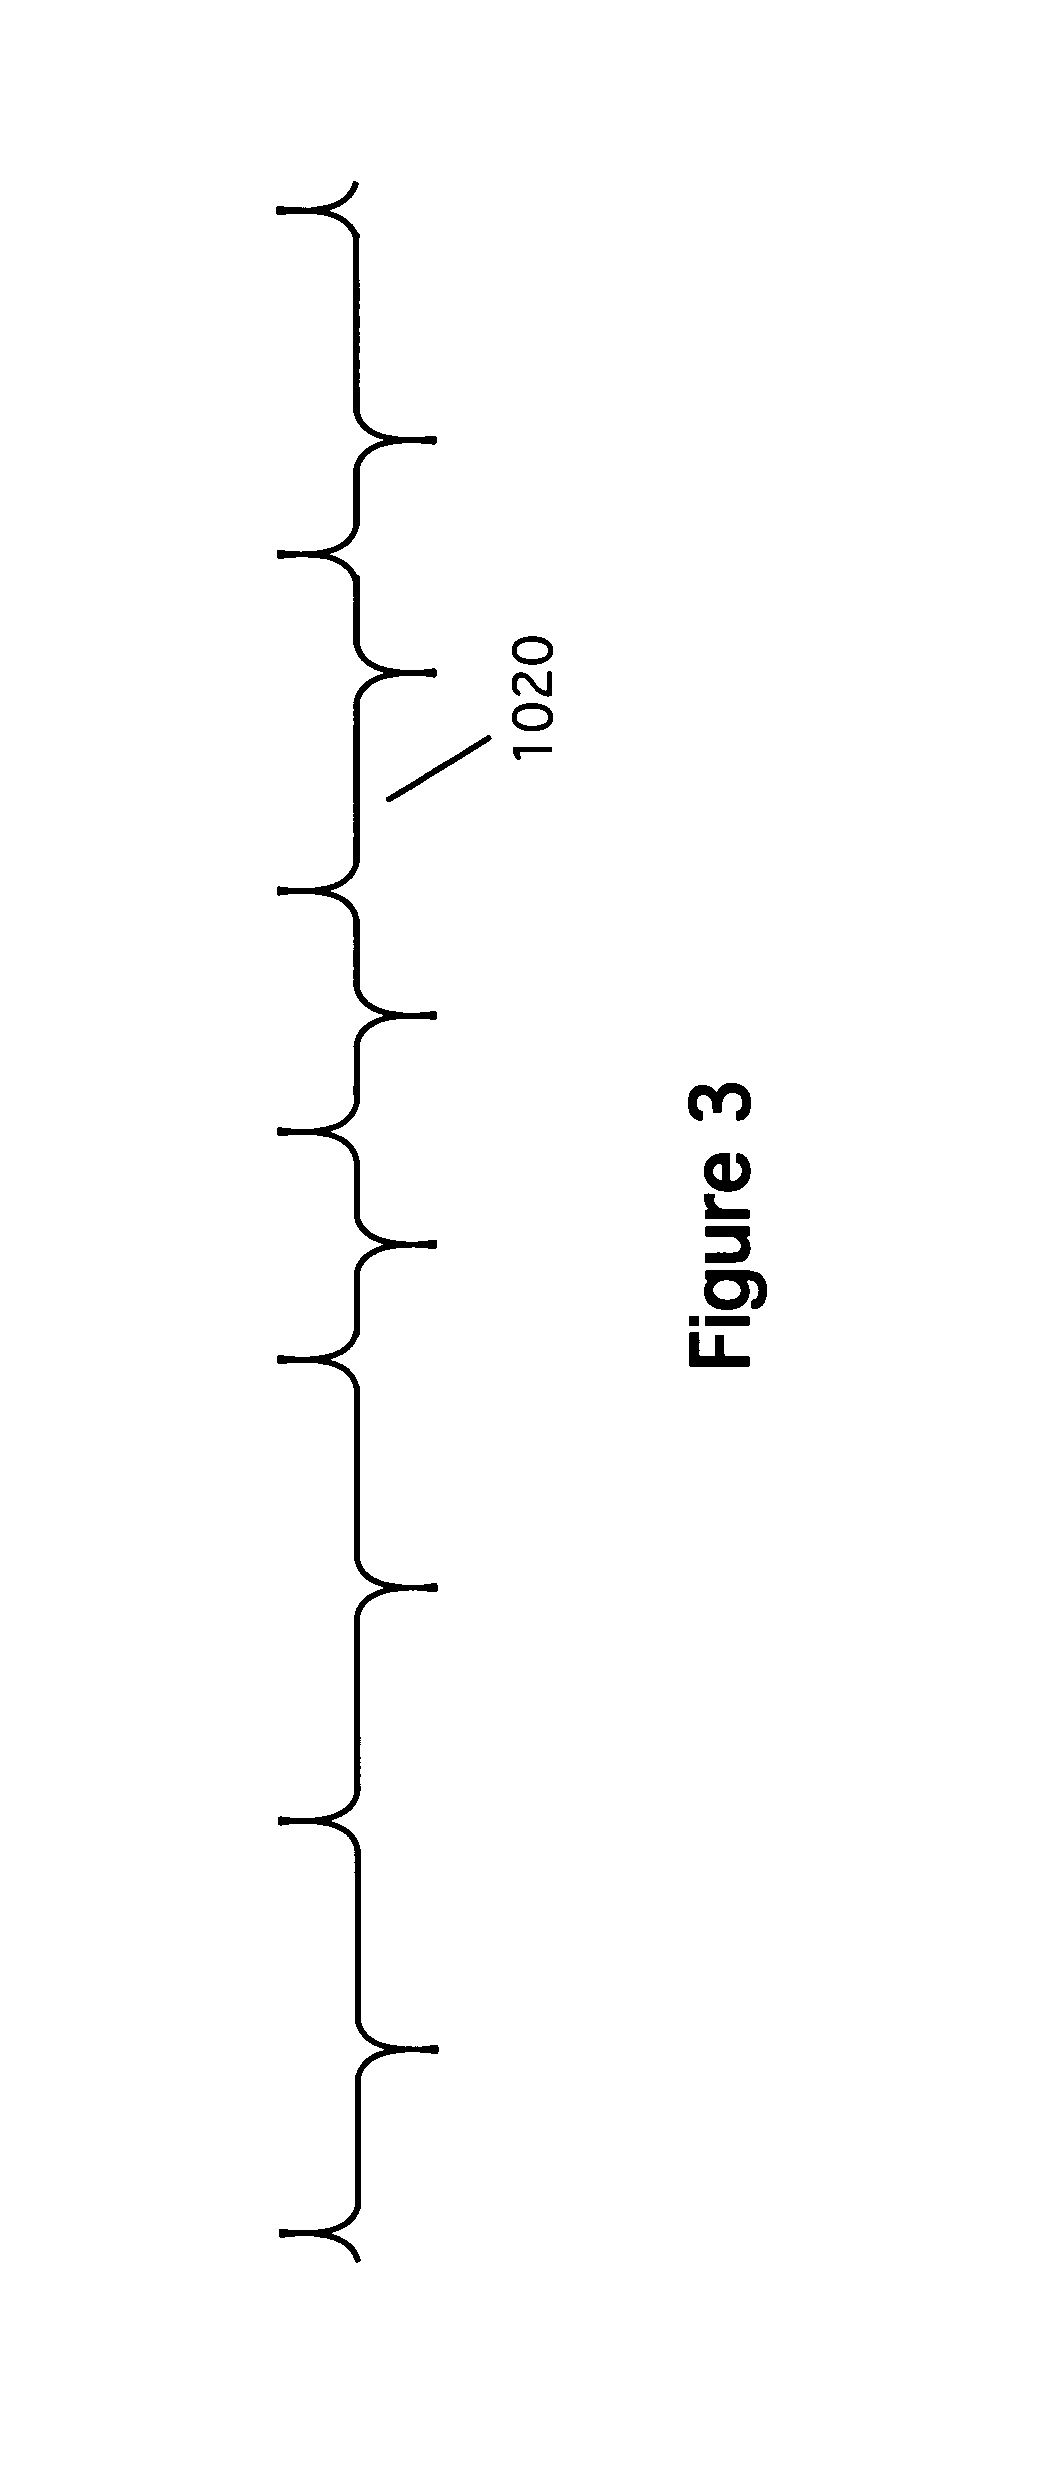 Simulated magnetic stripe card system and method for use with magnetic stripe card reading terminals